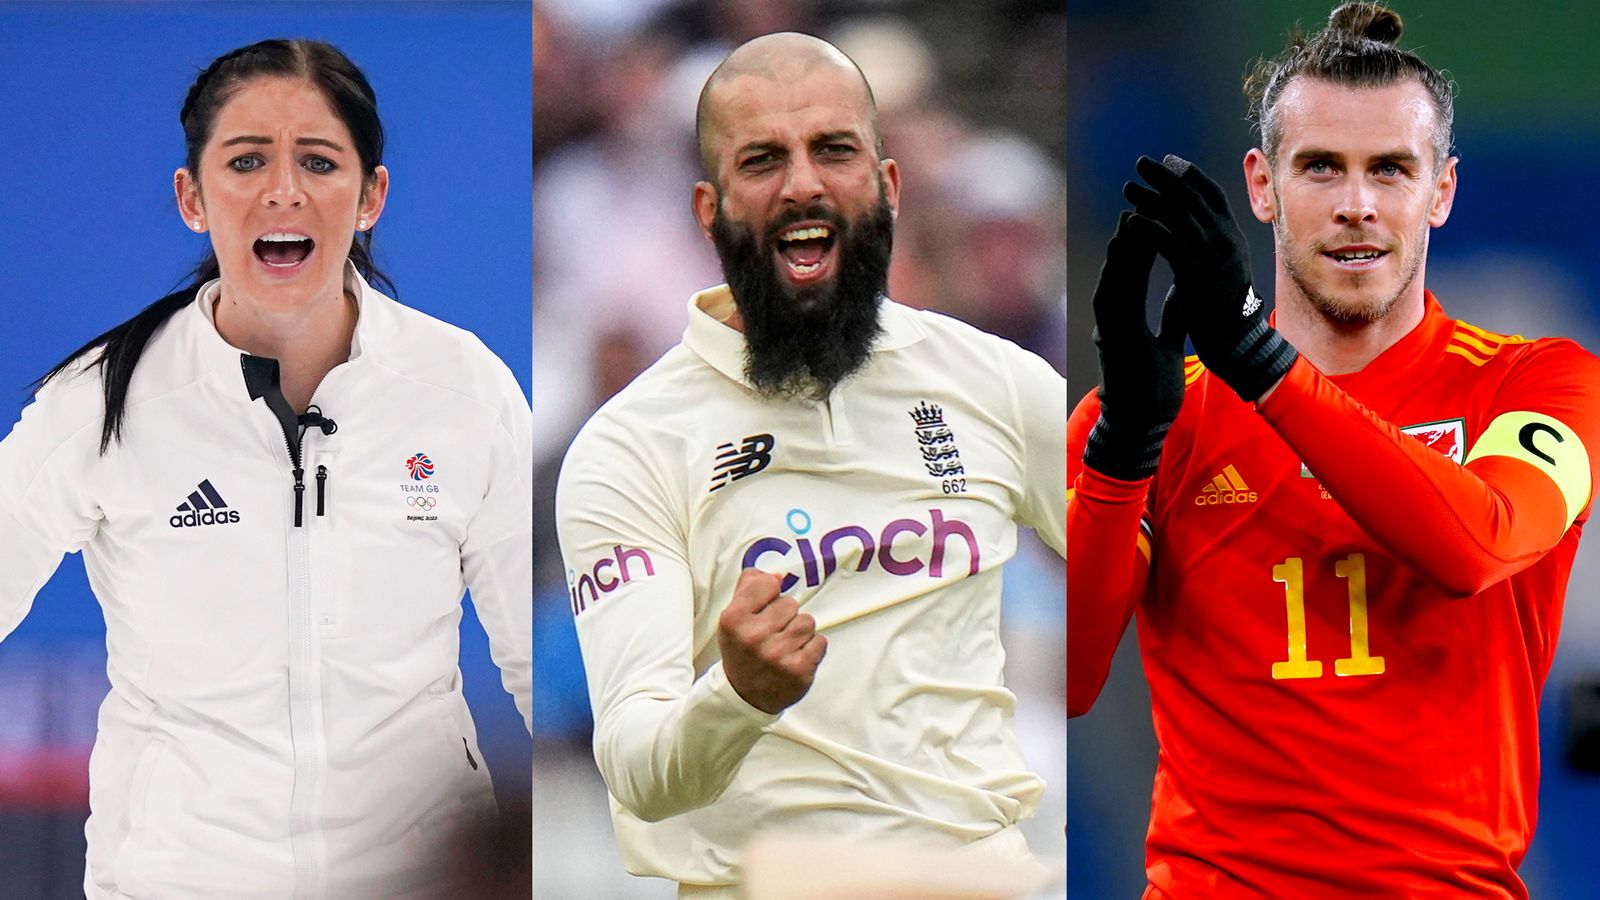 Queen’s Birthday Honours list: Gareth Bale, Moeen Ali and Eve Muirhead among sporting stars named